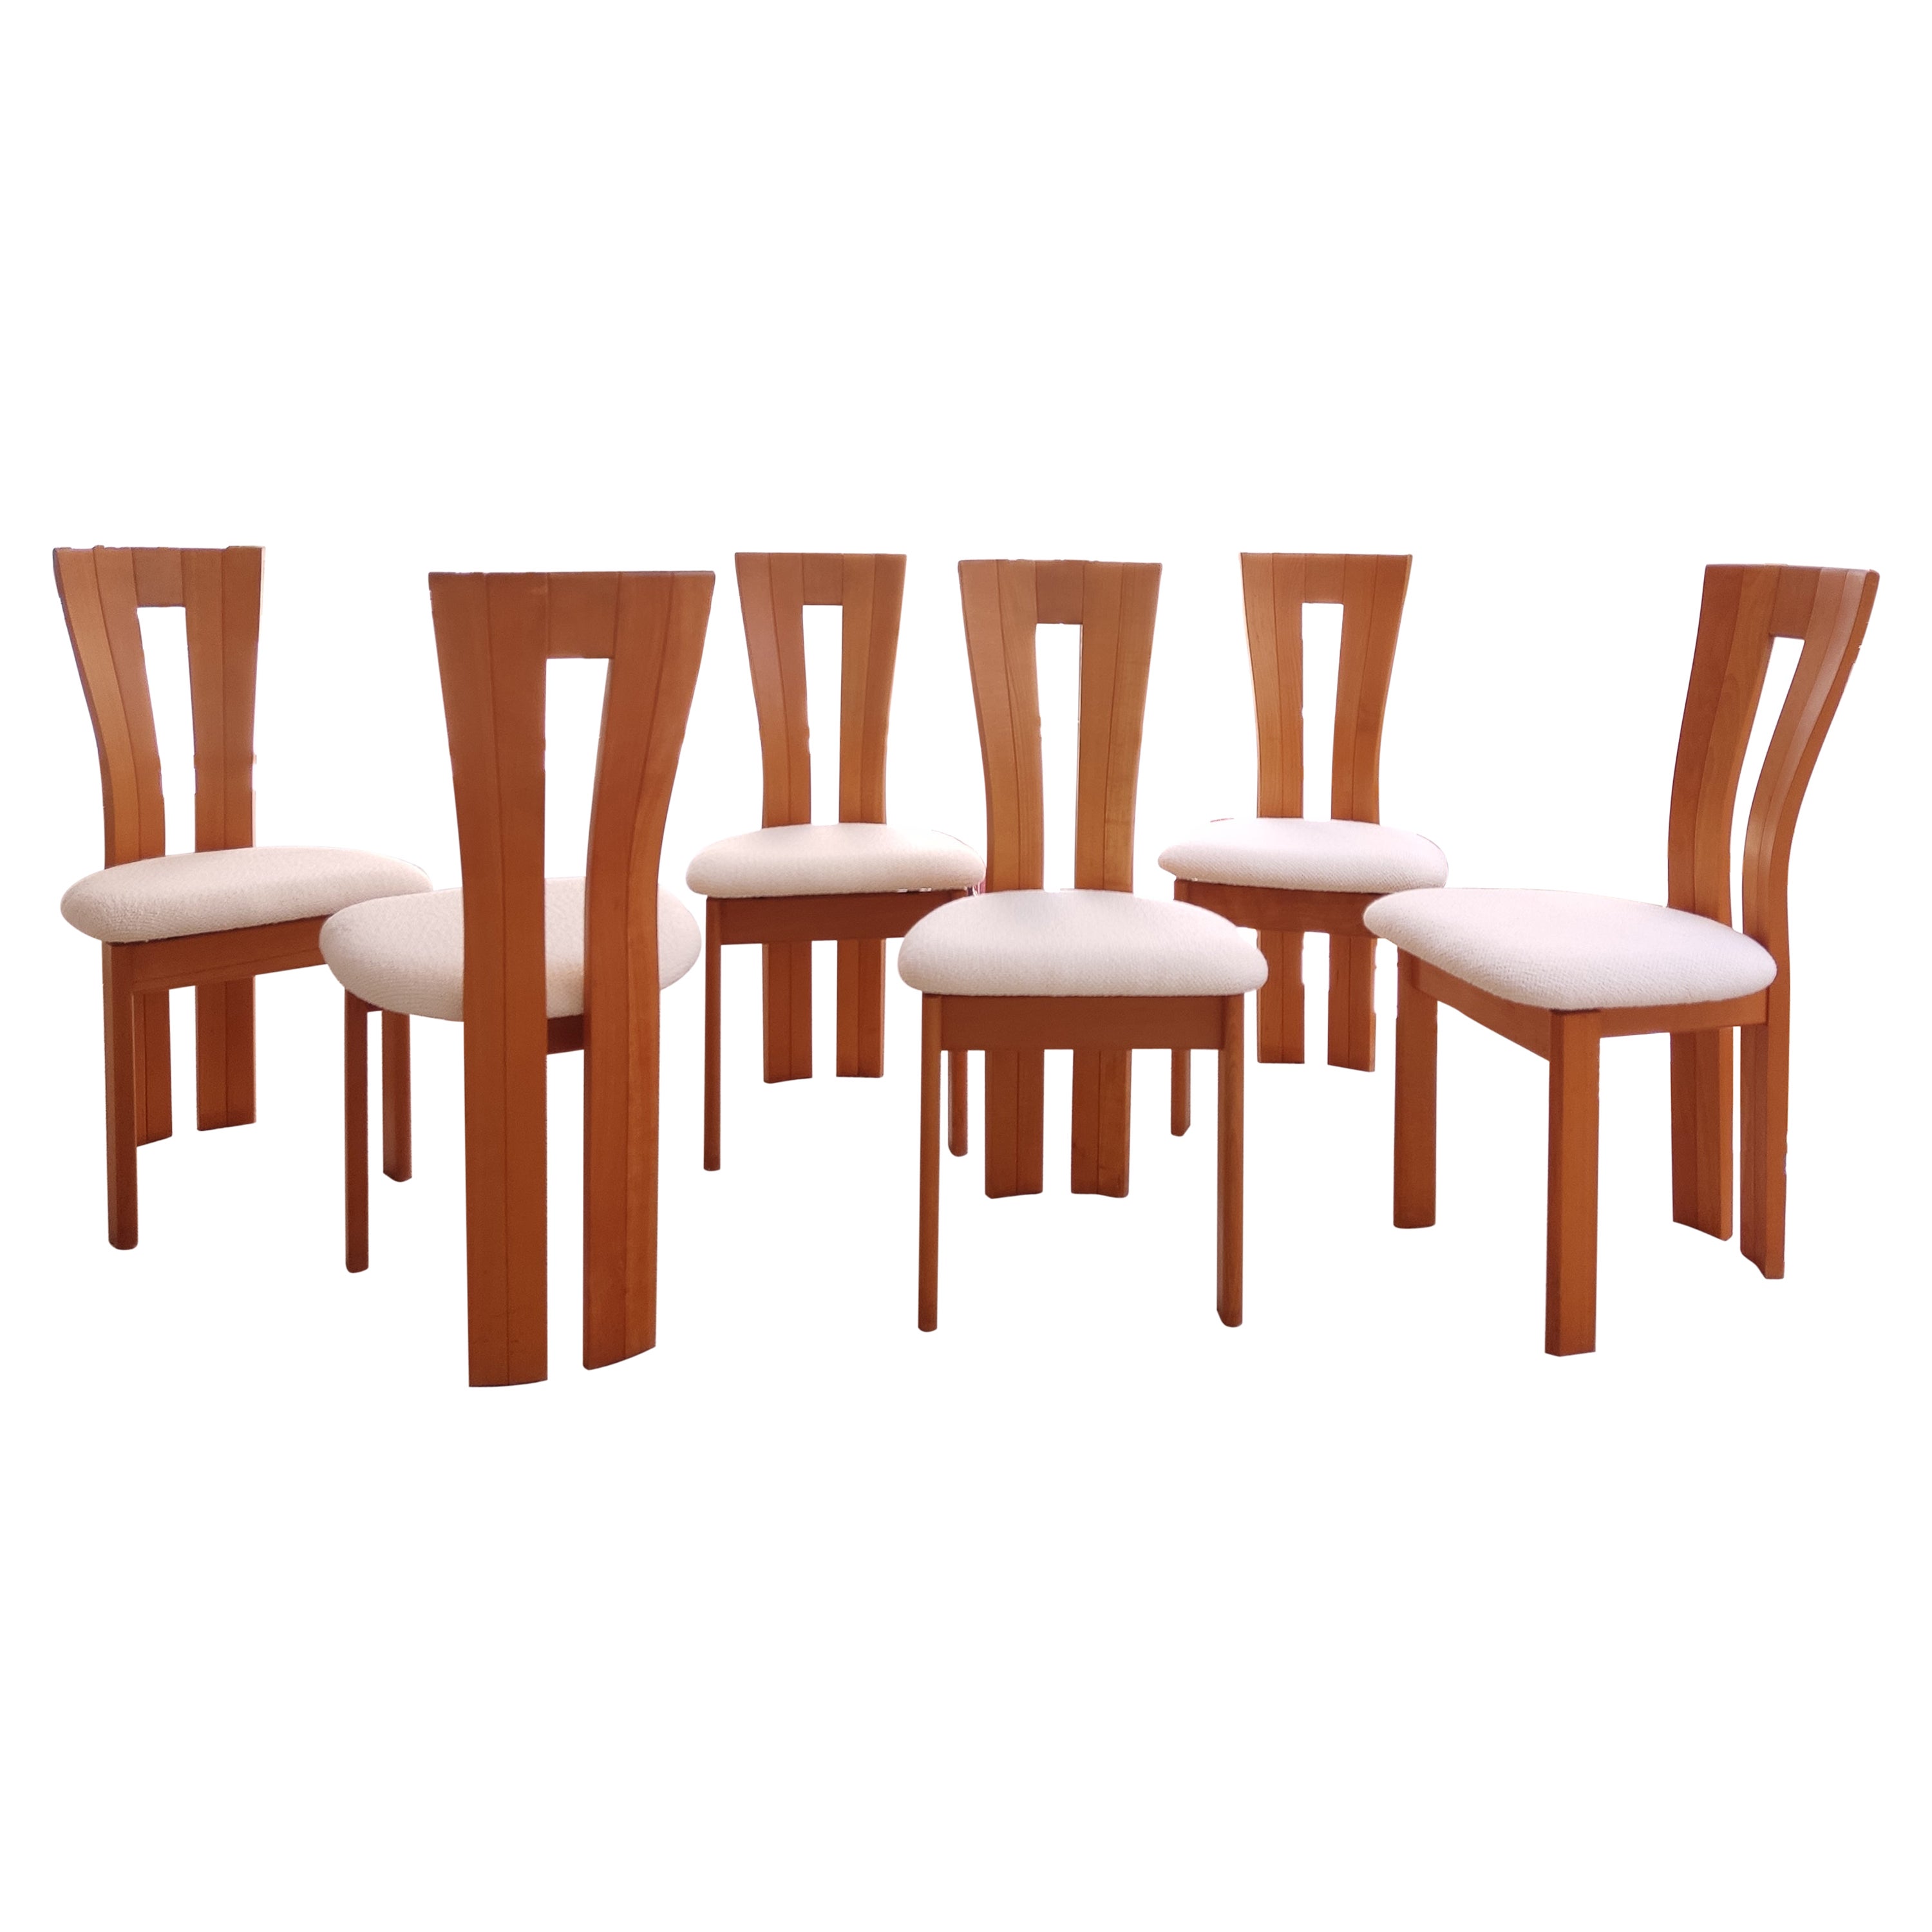 6 Woods and Bouclé Chairs